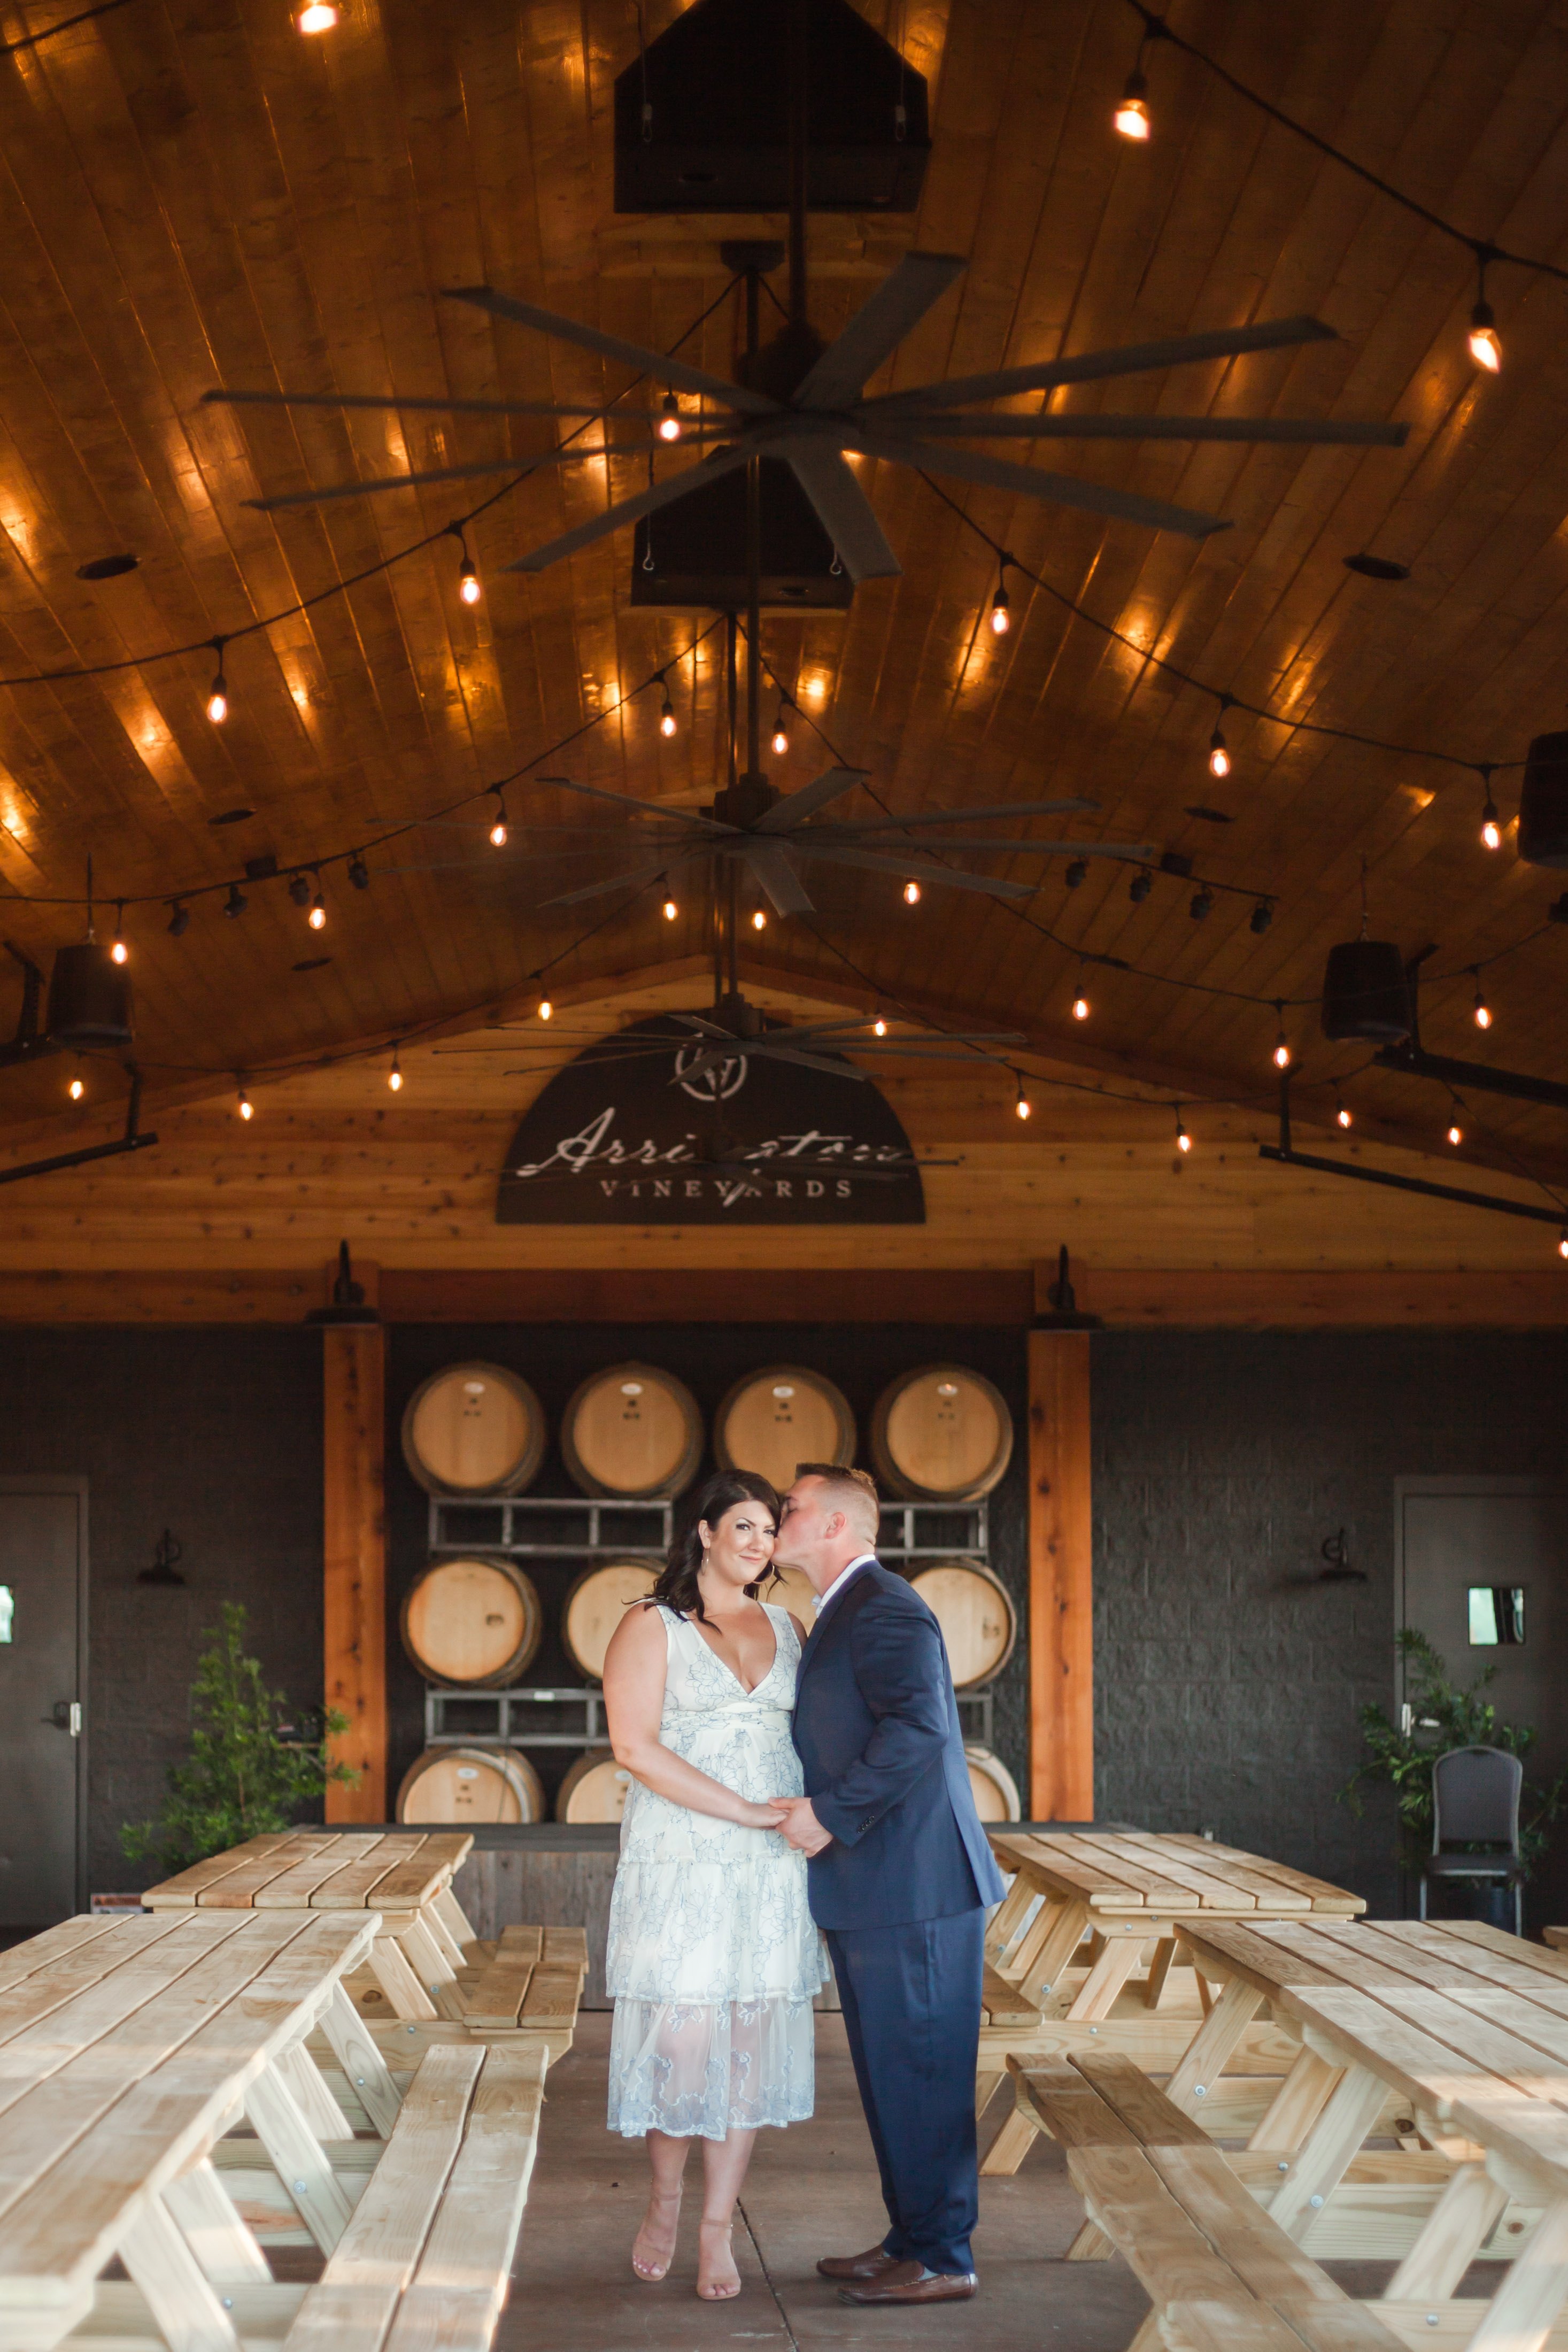 guy in navy suit kissing girl in white dress in front of wine barrels